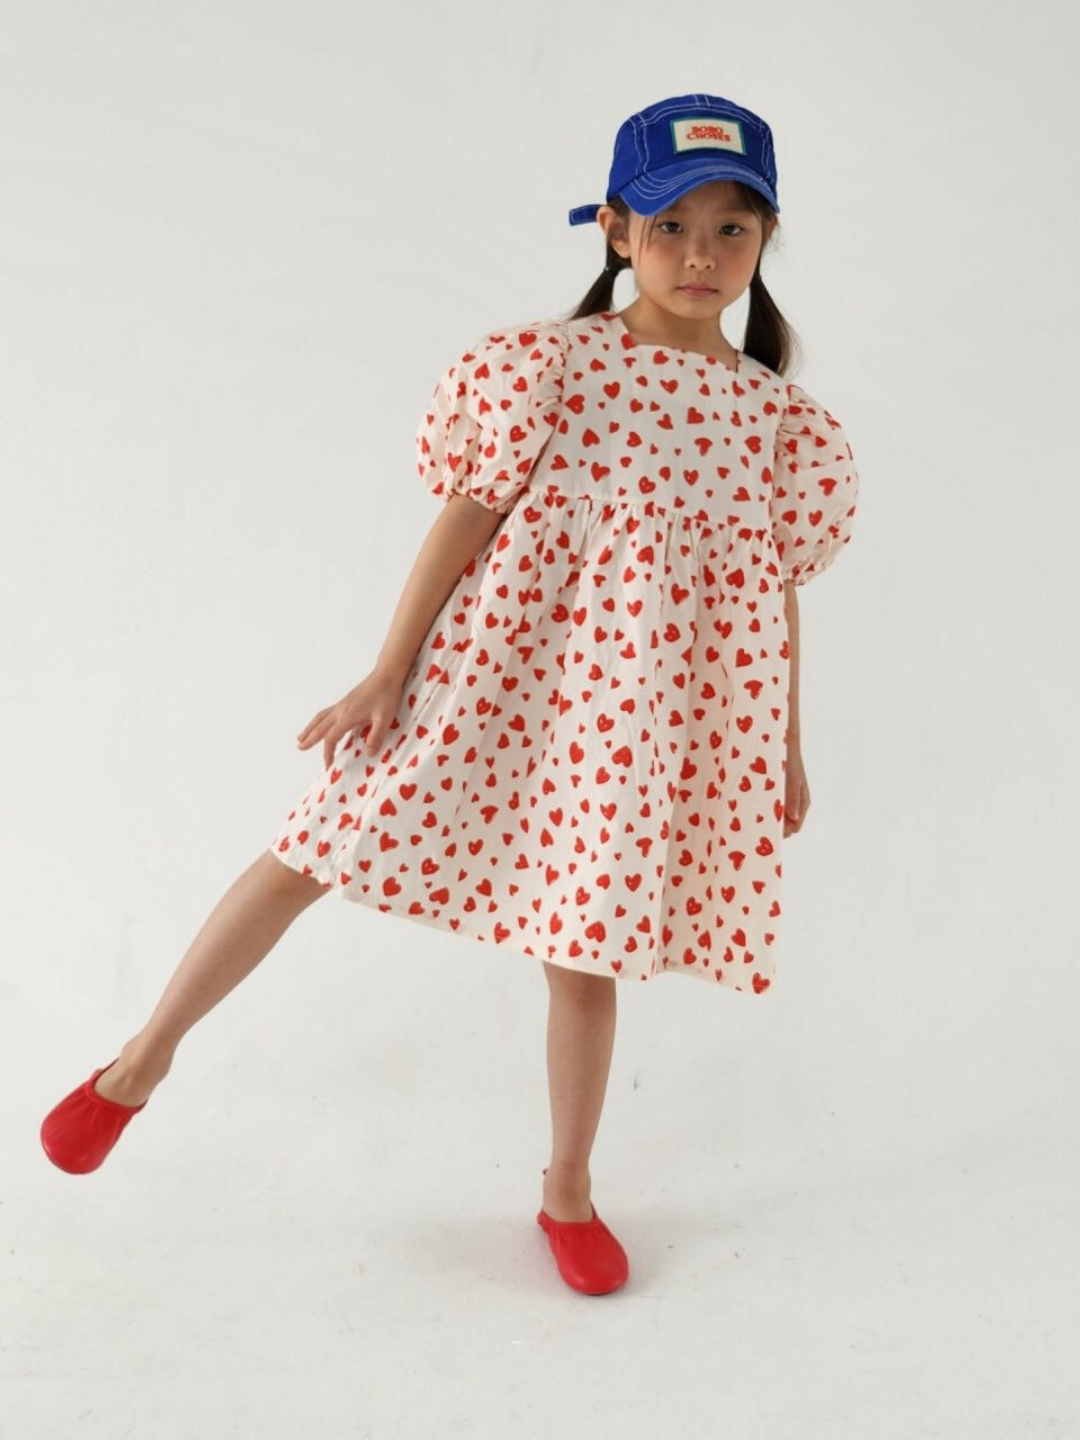 A child wearing a kid's puff-sleeved dress with red hearts on a white background